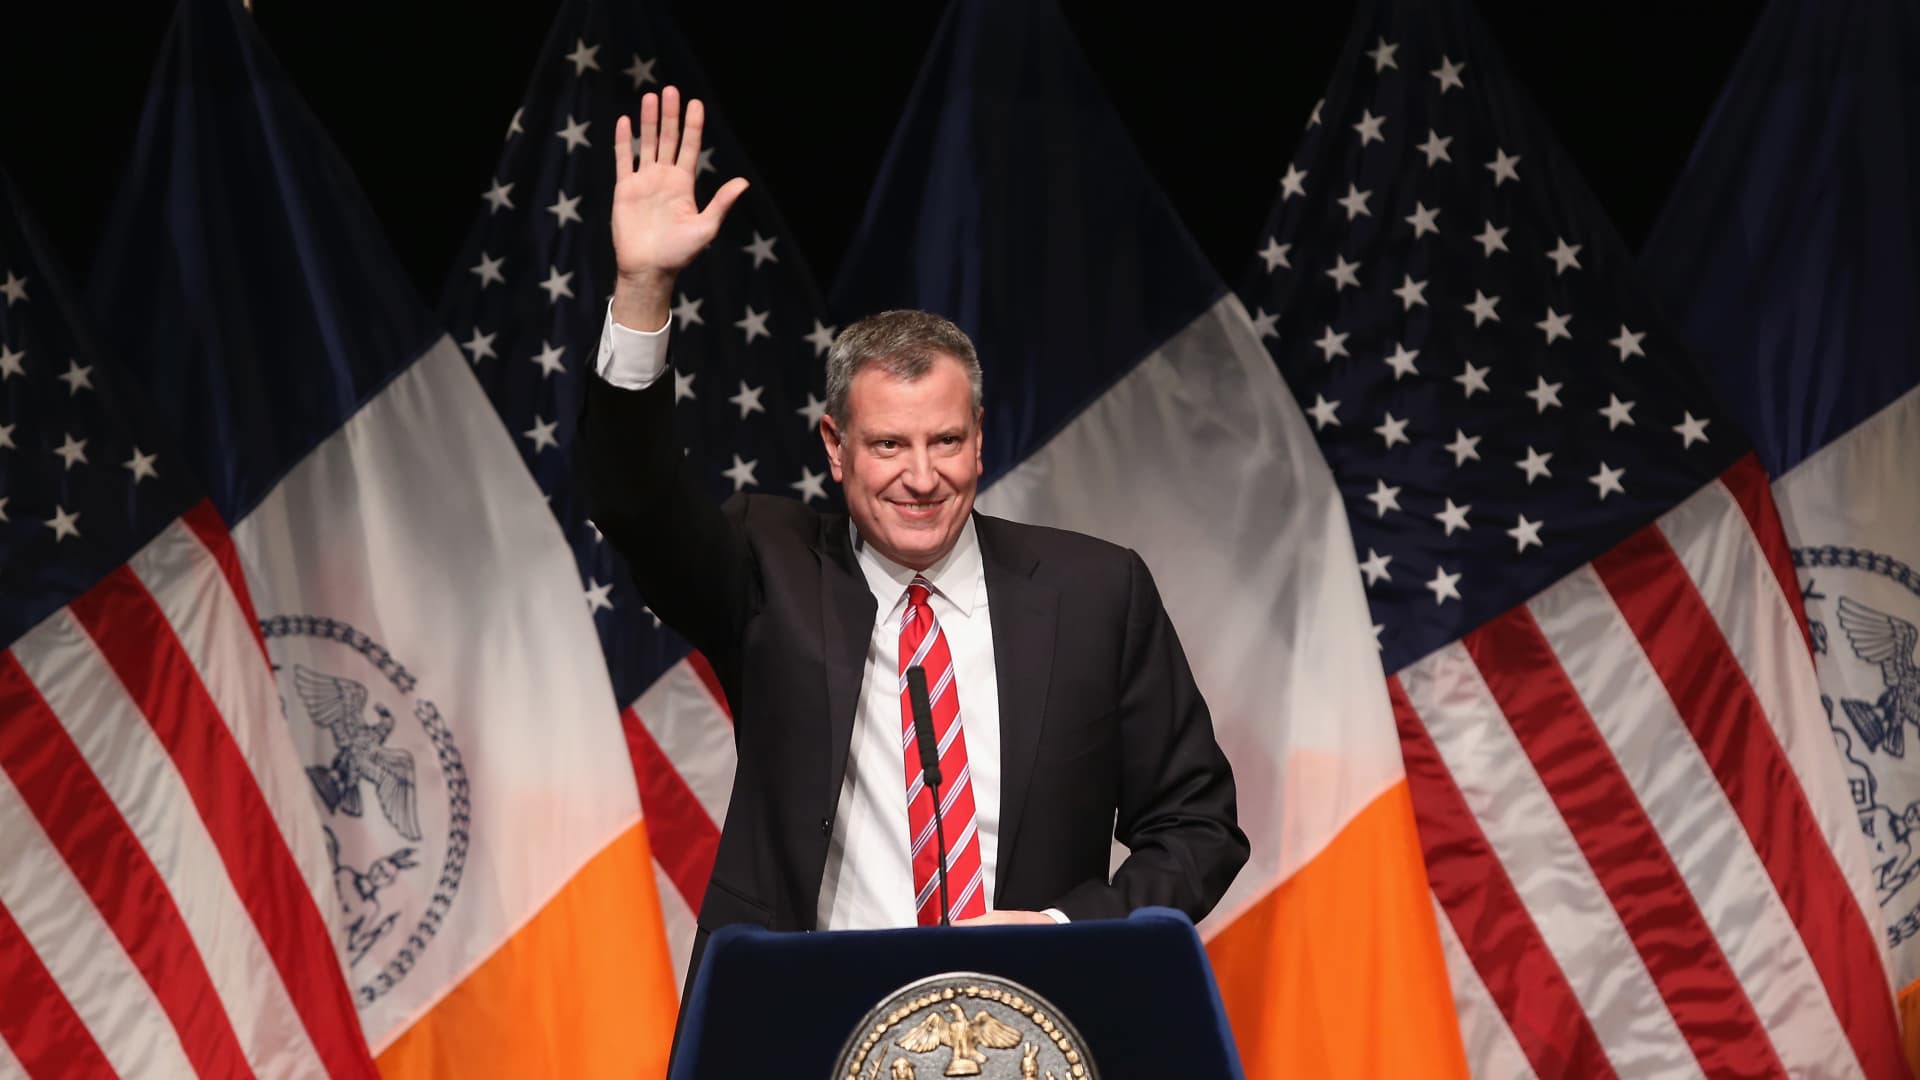 New York City Mayor Bill de Blasio waves as he gives the State of the City address at La Guardia Community College on February 10, 2014 in the Long Island City section of the Queens borough of New York City.